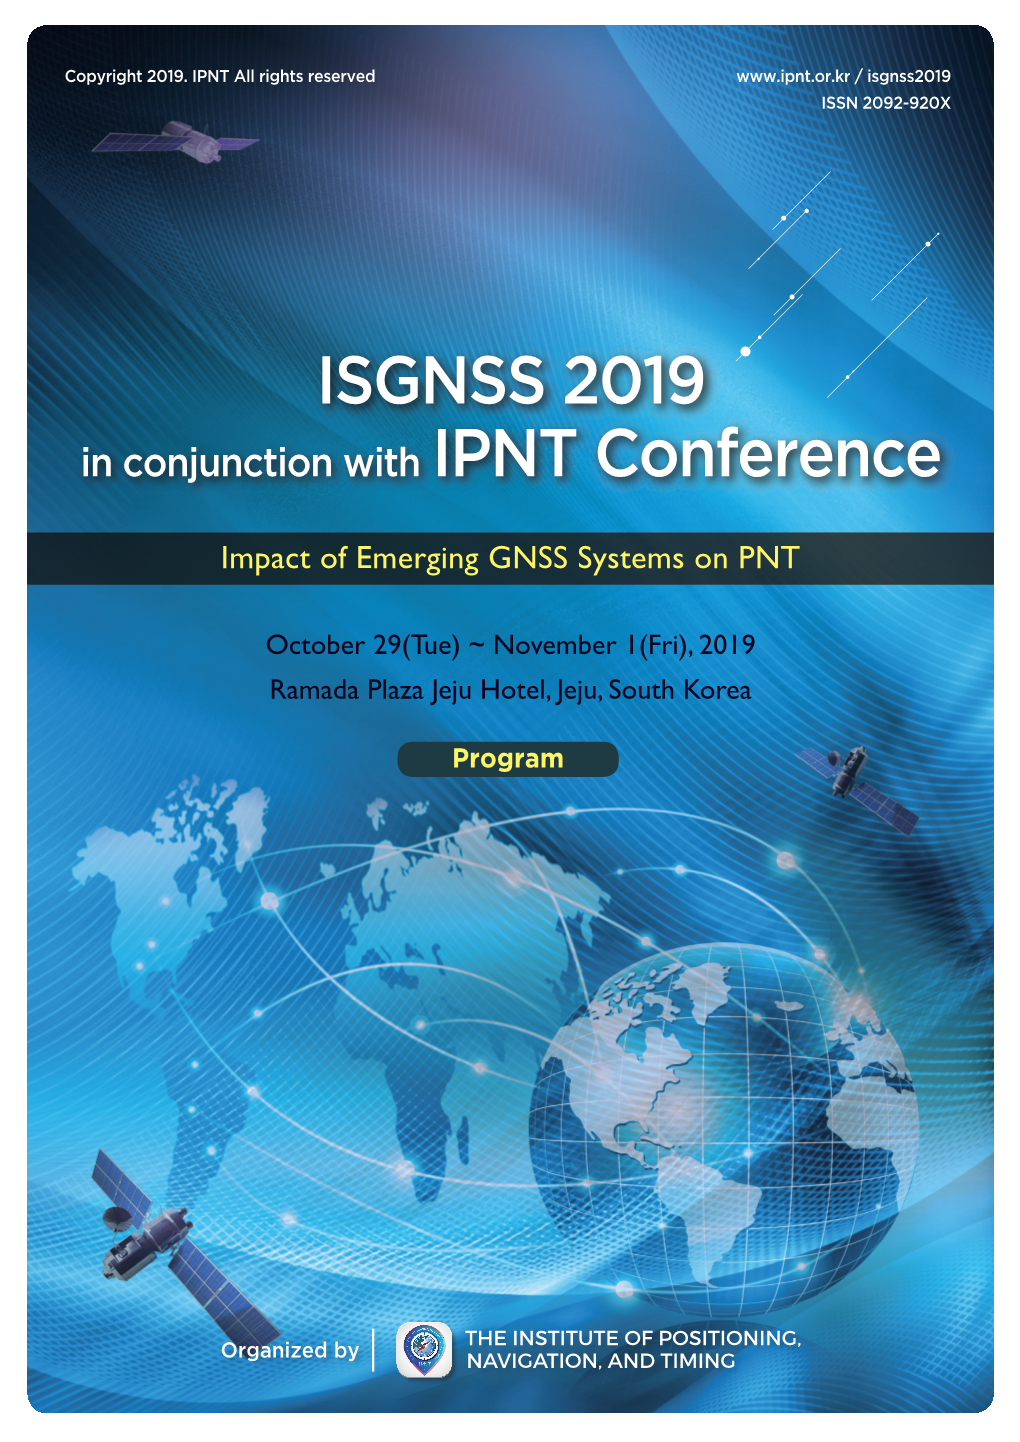 ISGNSS 2019 in Conjunction with IPNT Conference